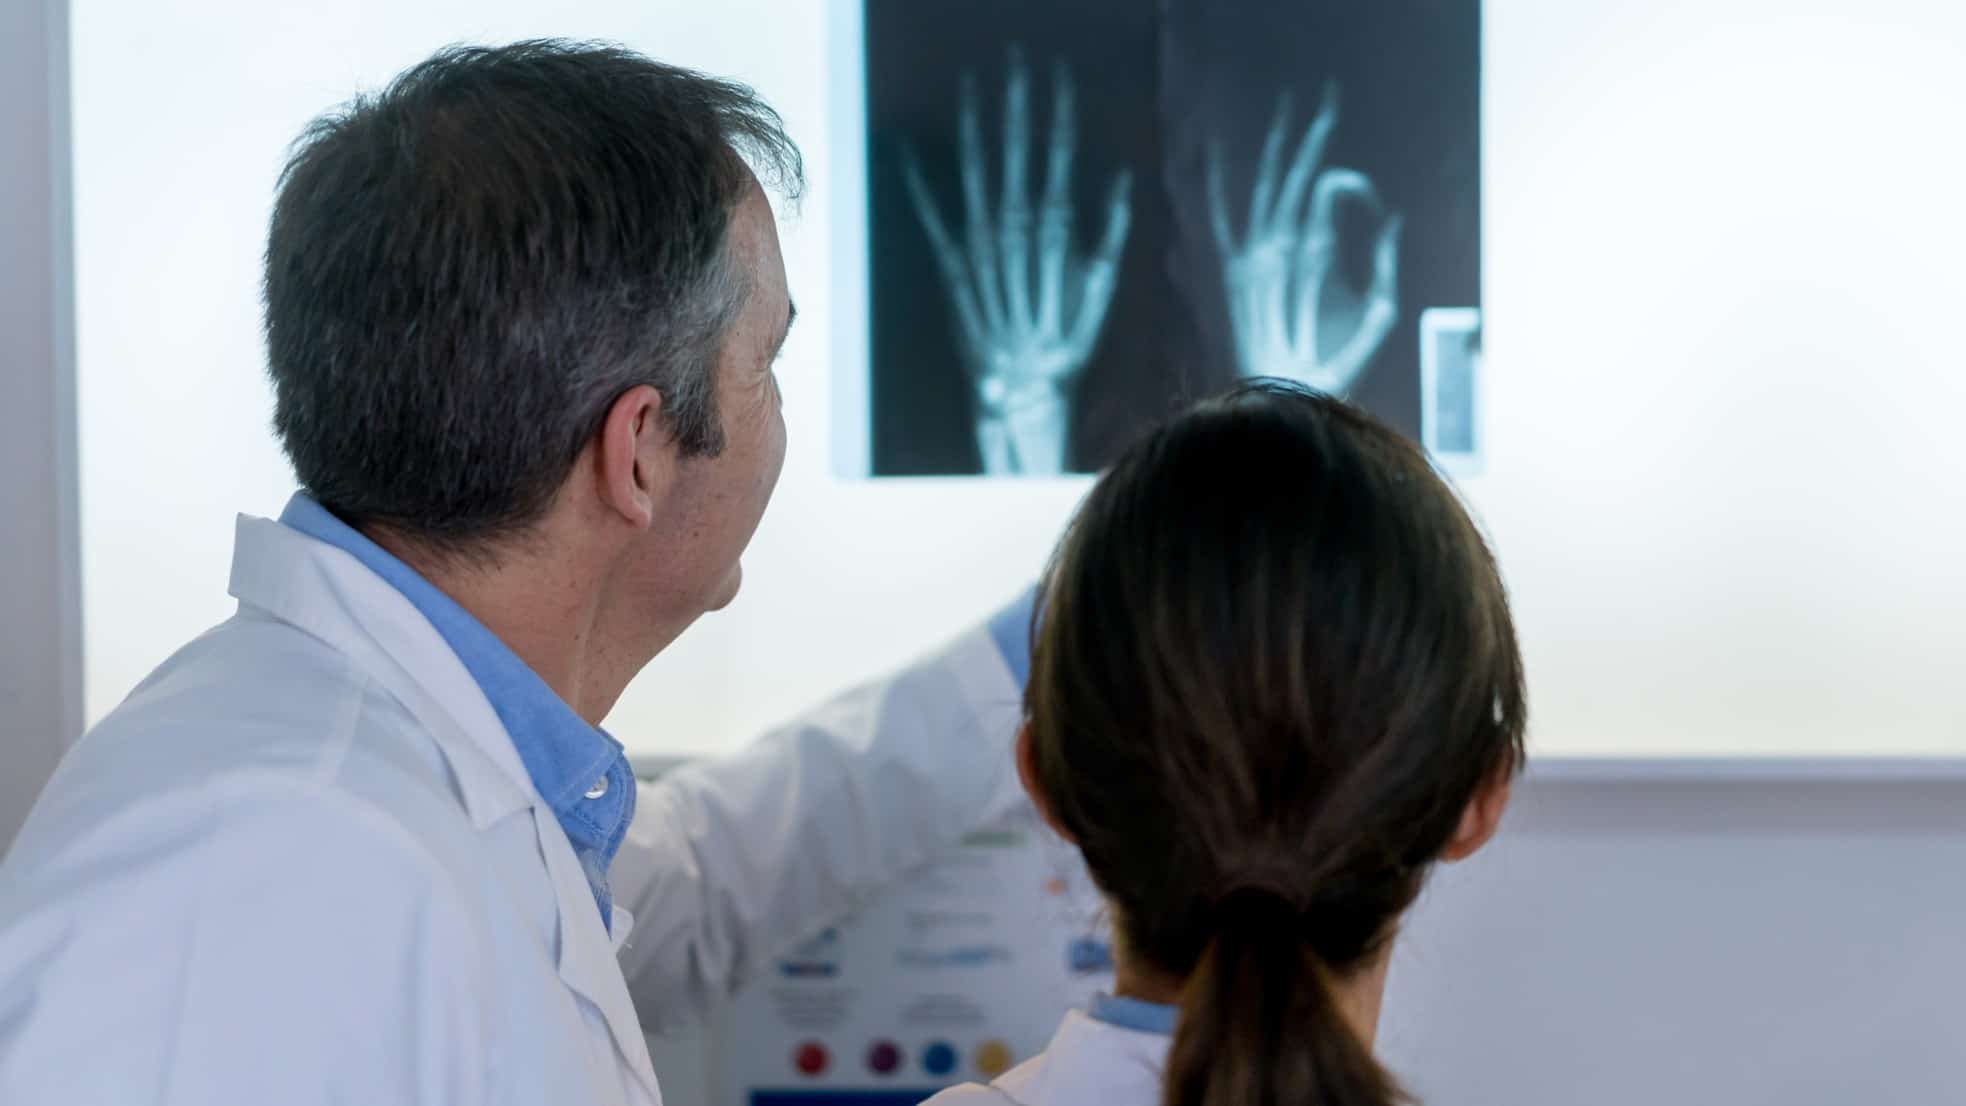 Medical specialist examine an xray of two hands, indicating share price movement in an ASX imaging company